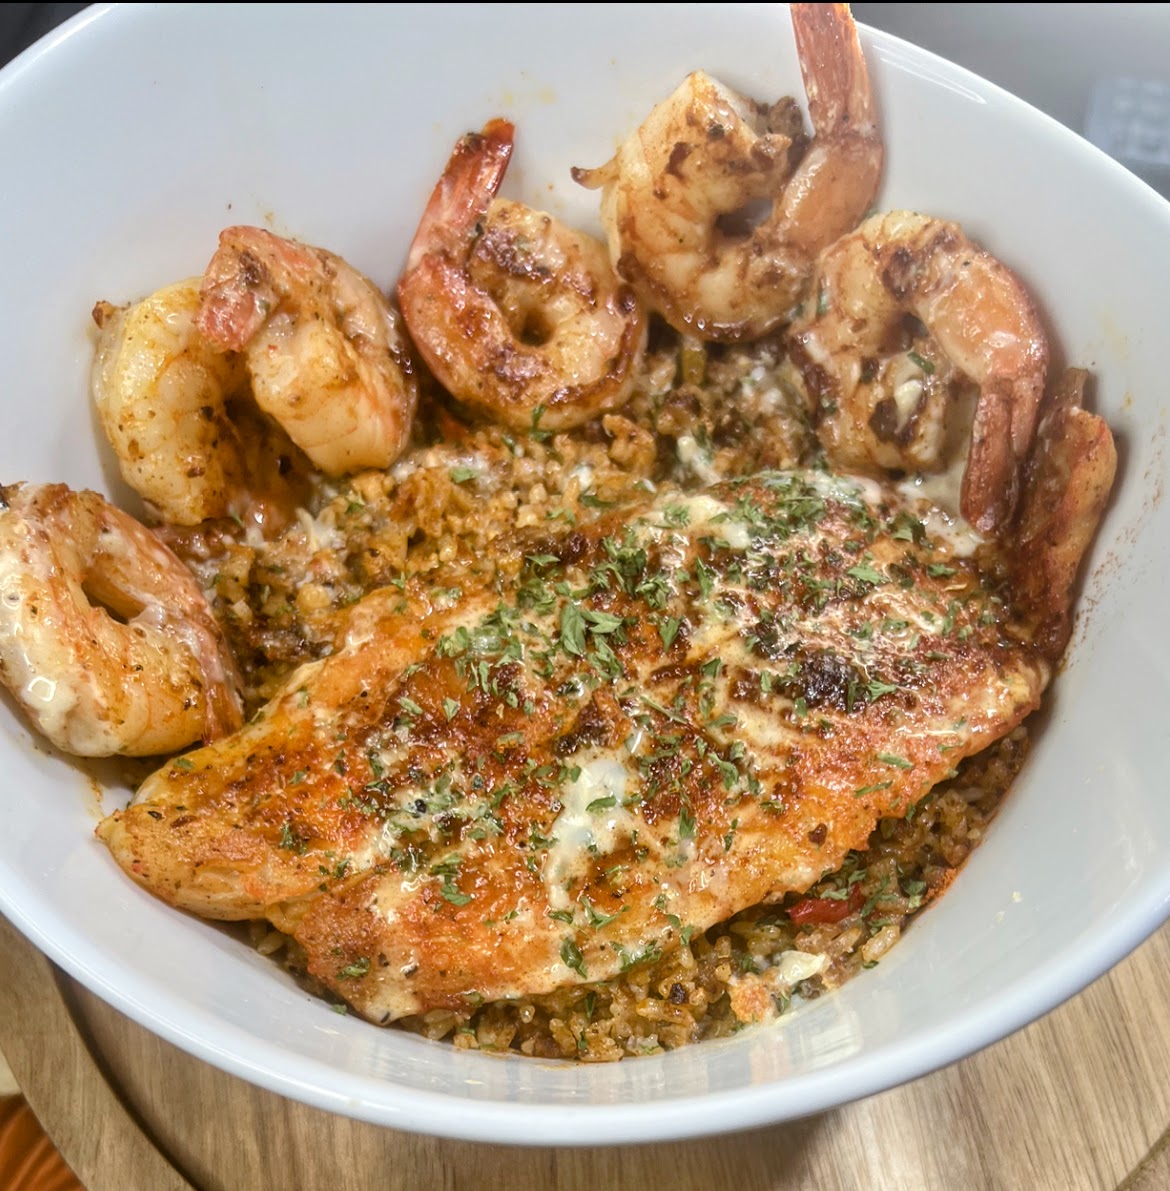 Louisiana Fish & Shrimp with Louisiana Dirty Rice with Crab and Lobster Butter Sauce